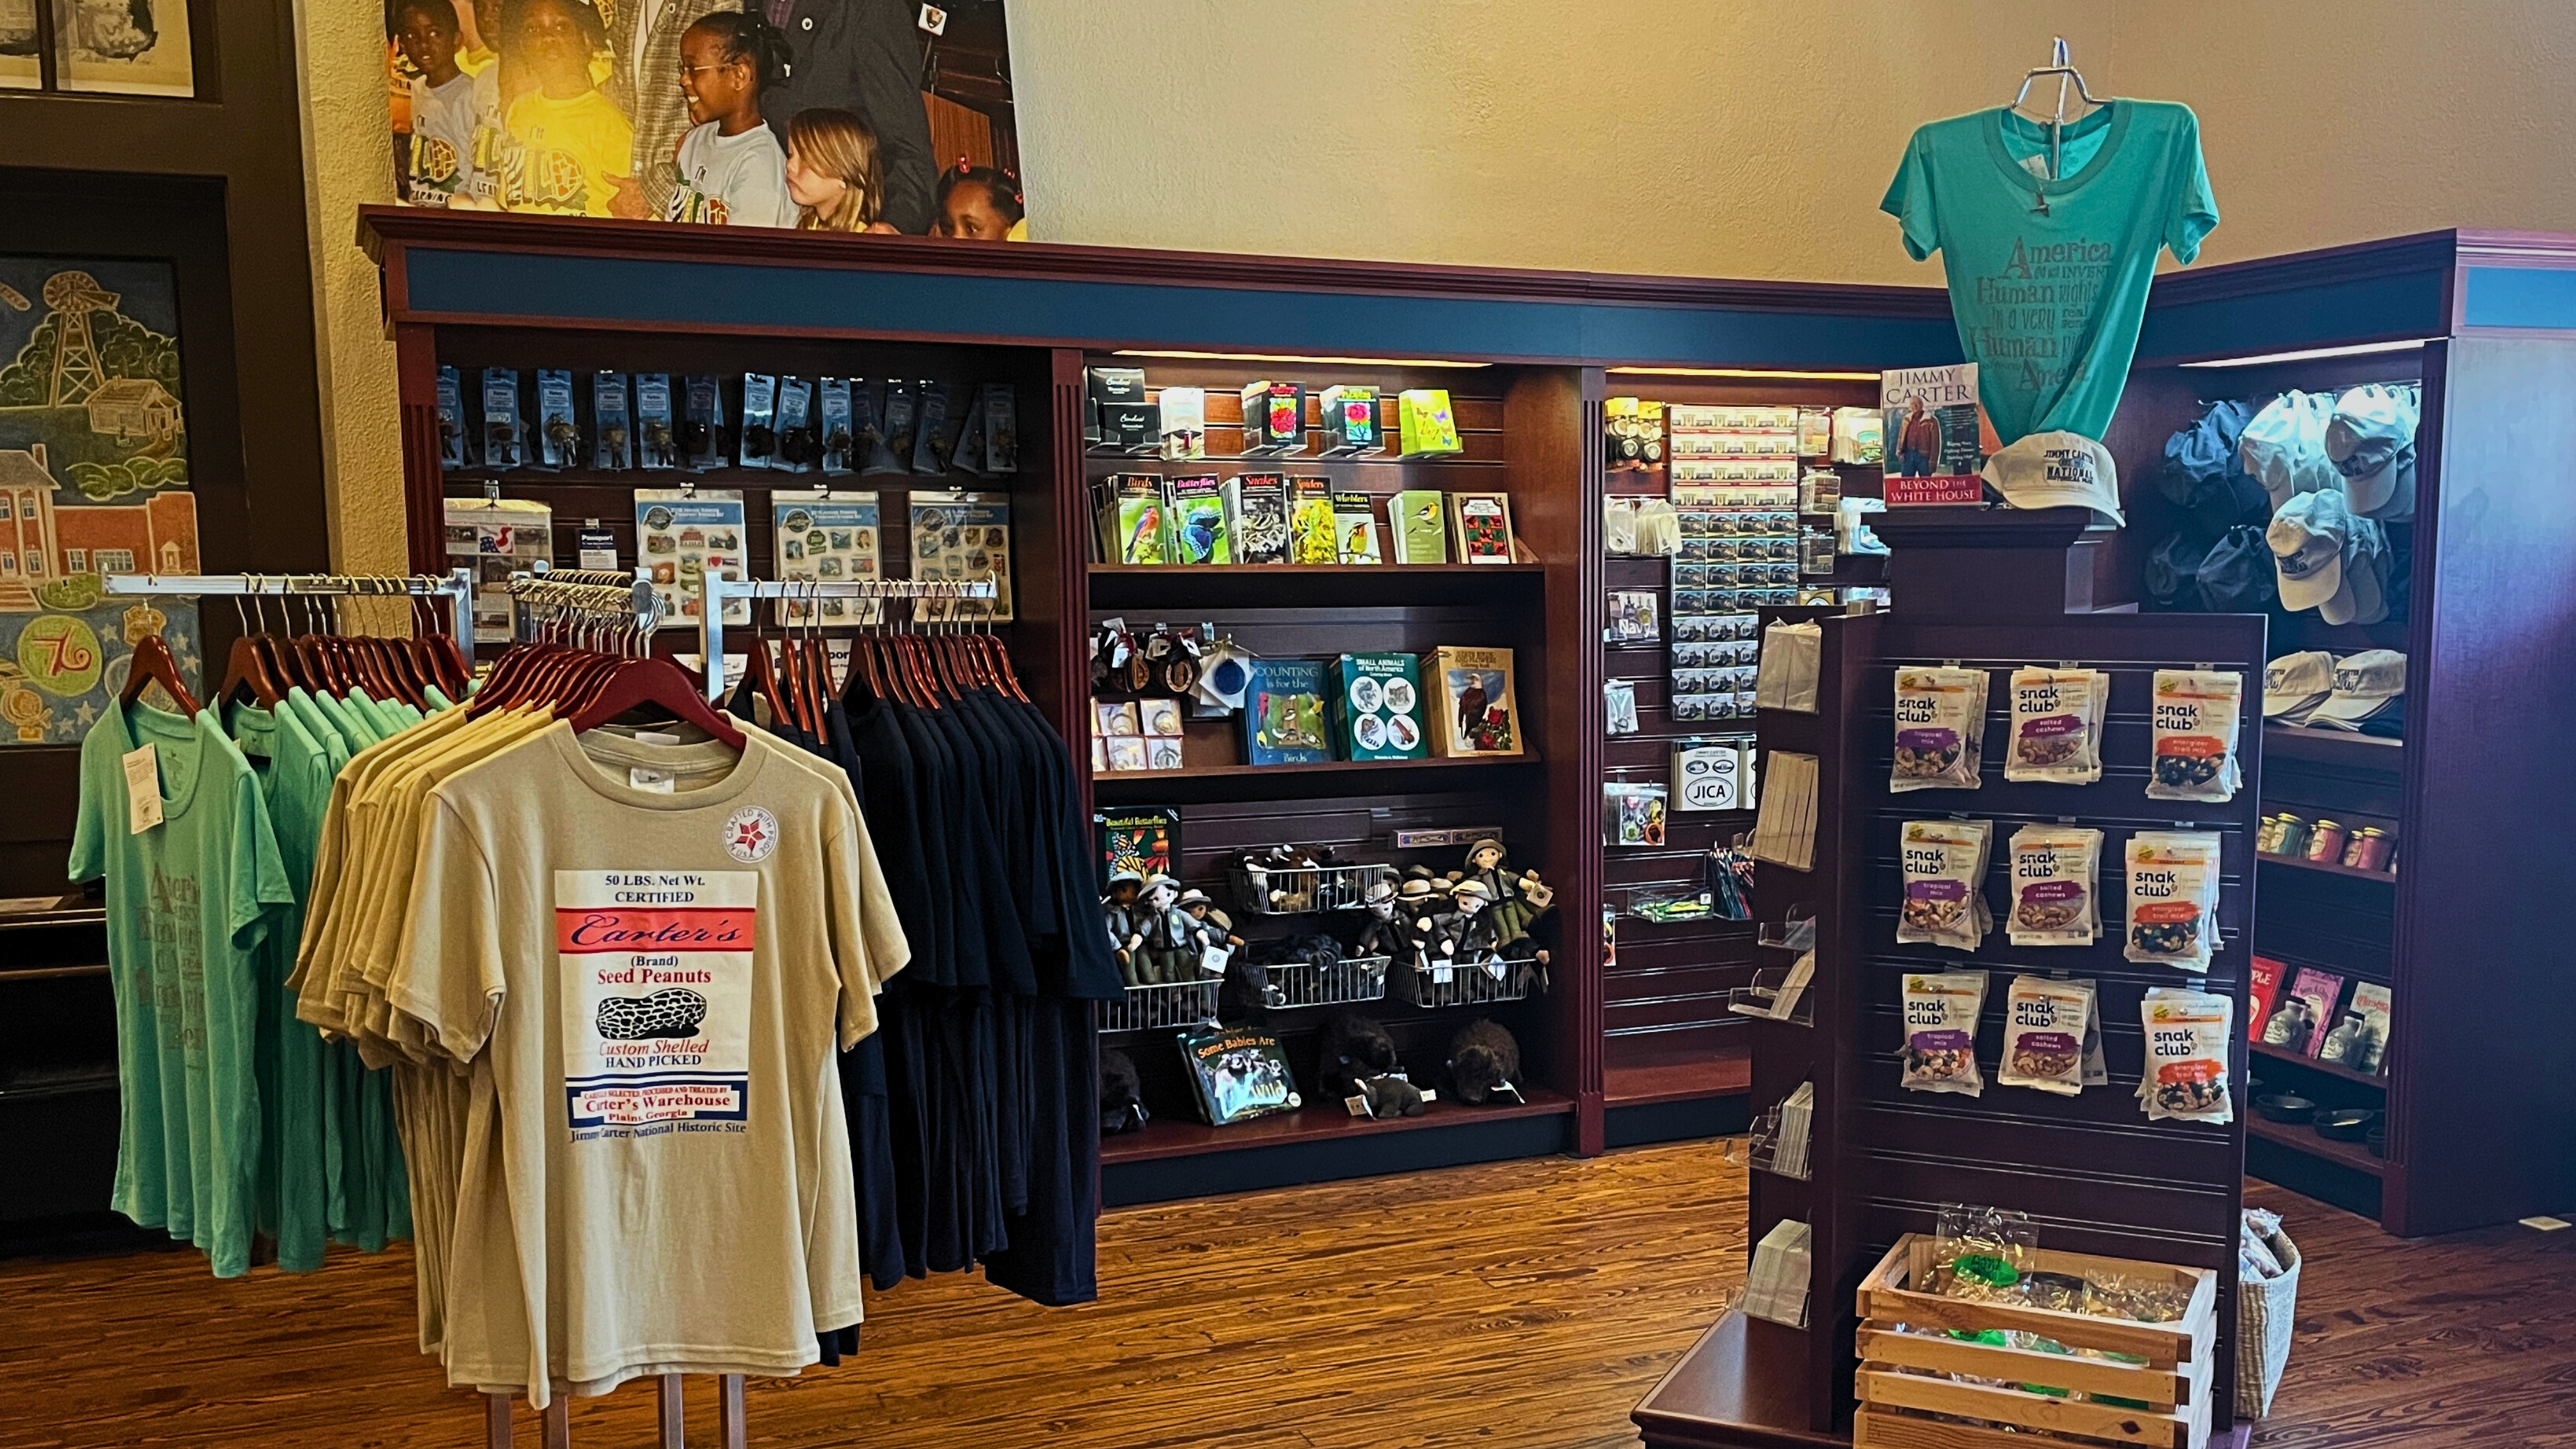 Park store with t-shirts, hats, books, and other educational items for sale.